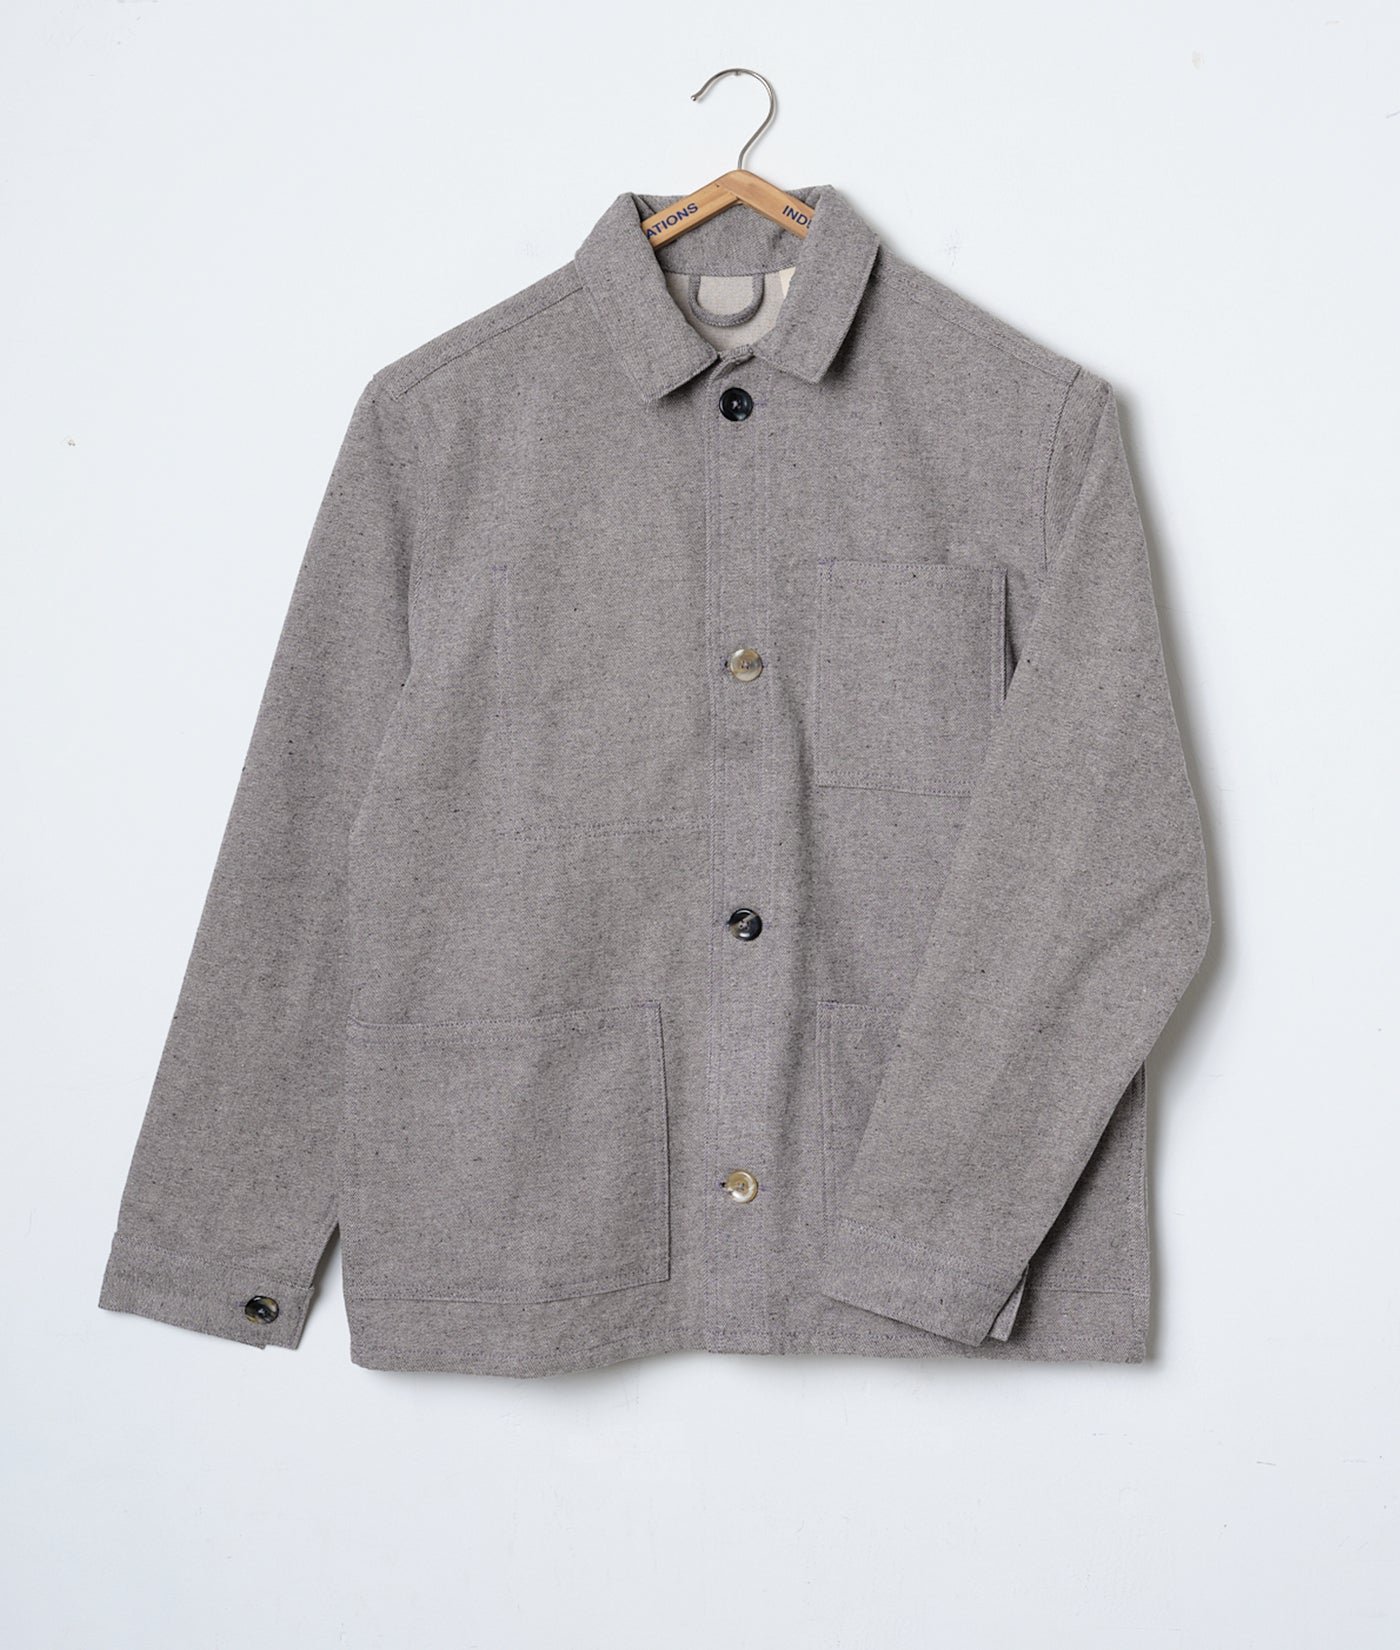 Industry of All Nations New Work Jacket in Charcoal